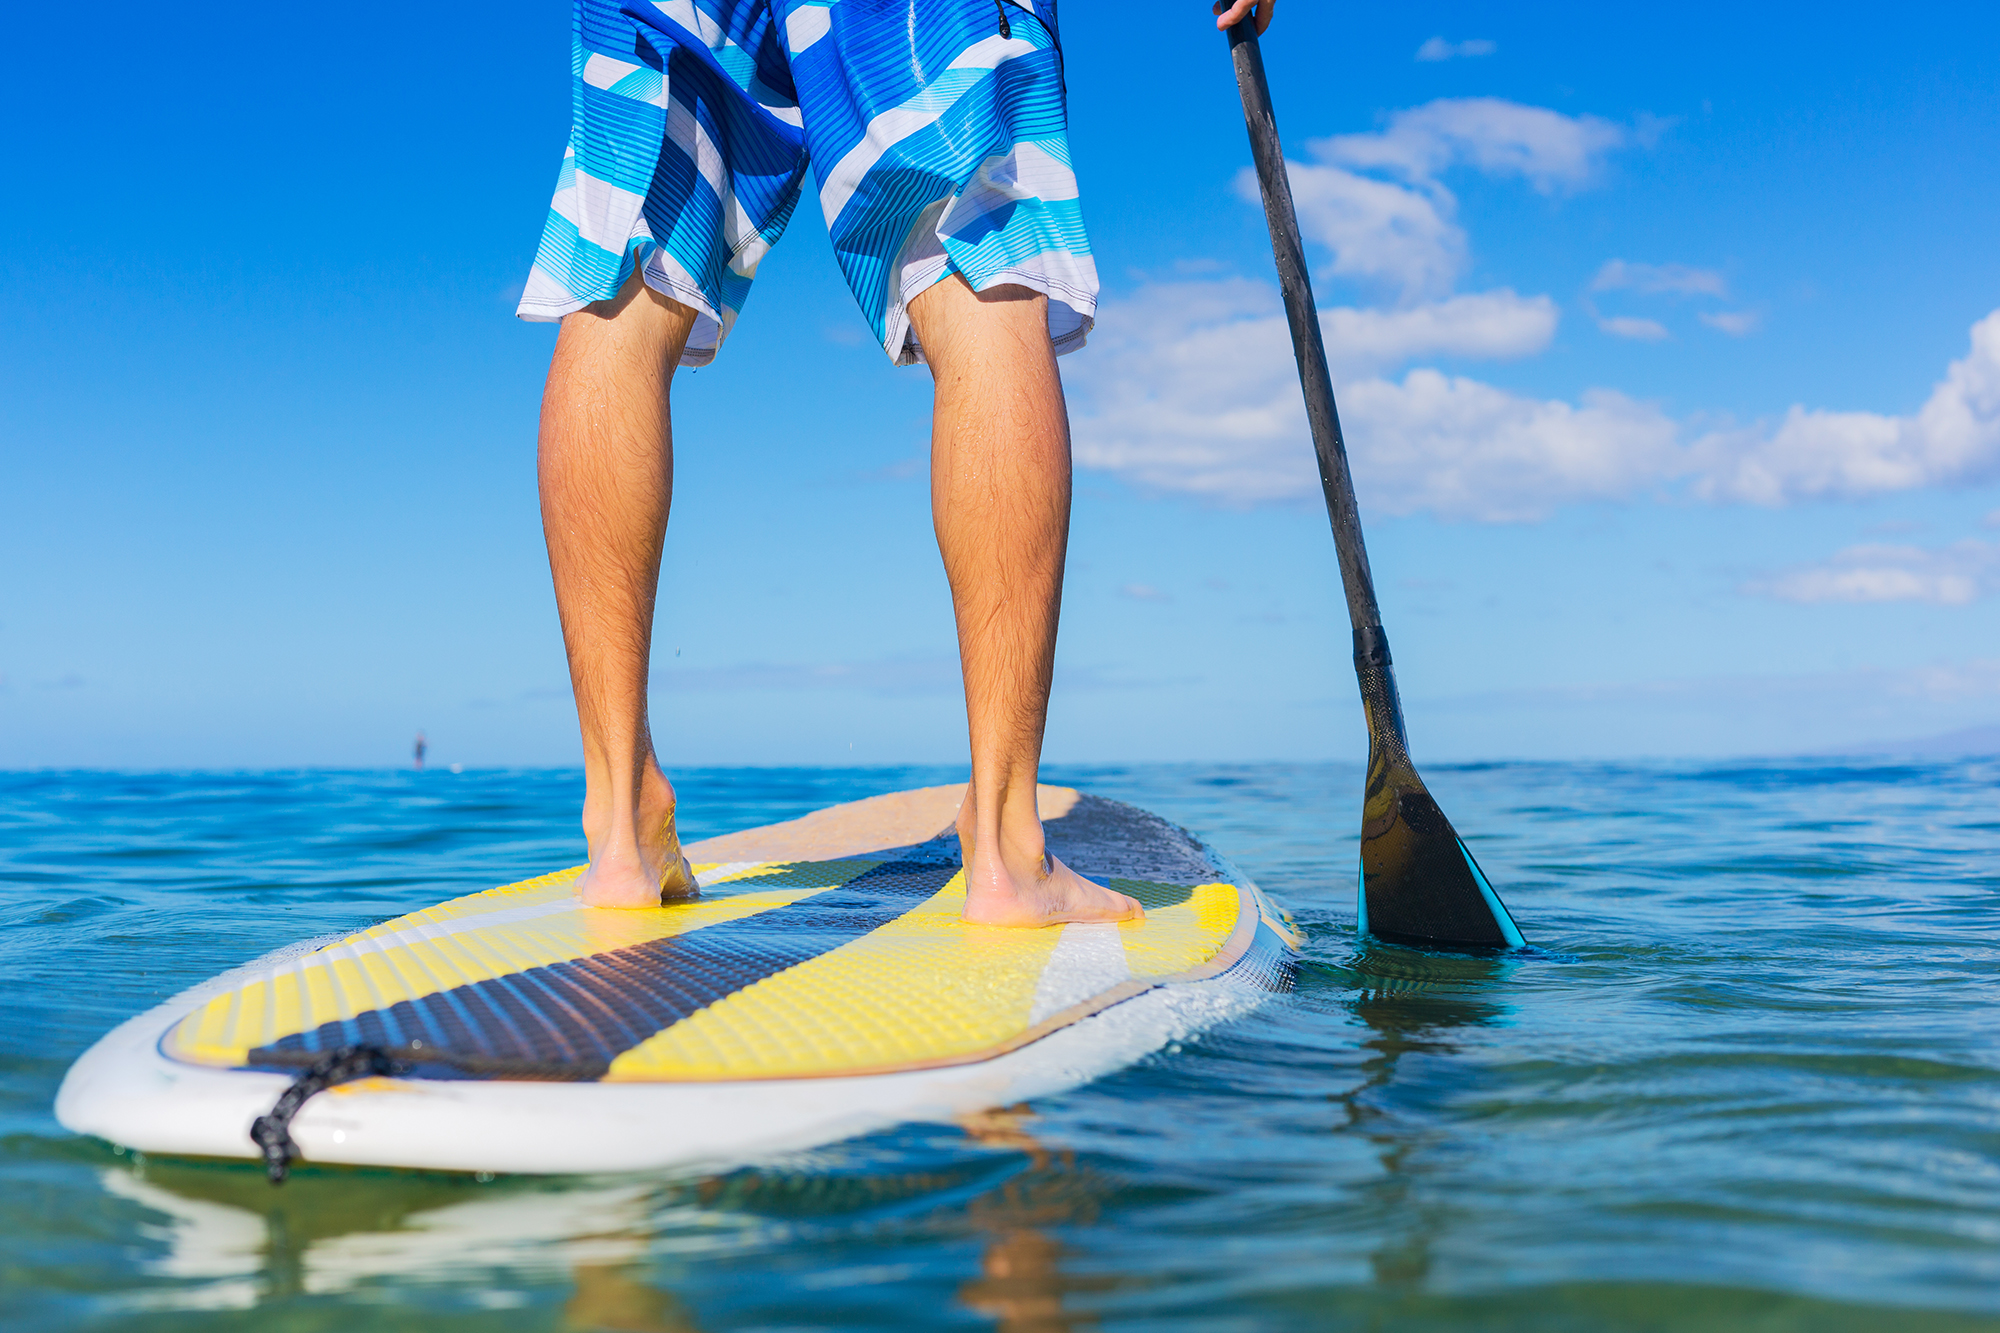 March Marine Committee - Stand Up Paddle Boarding